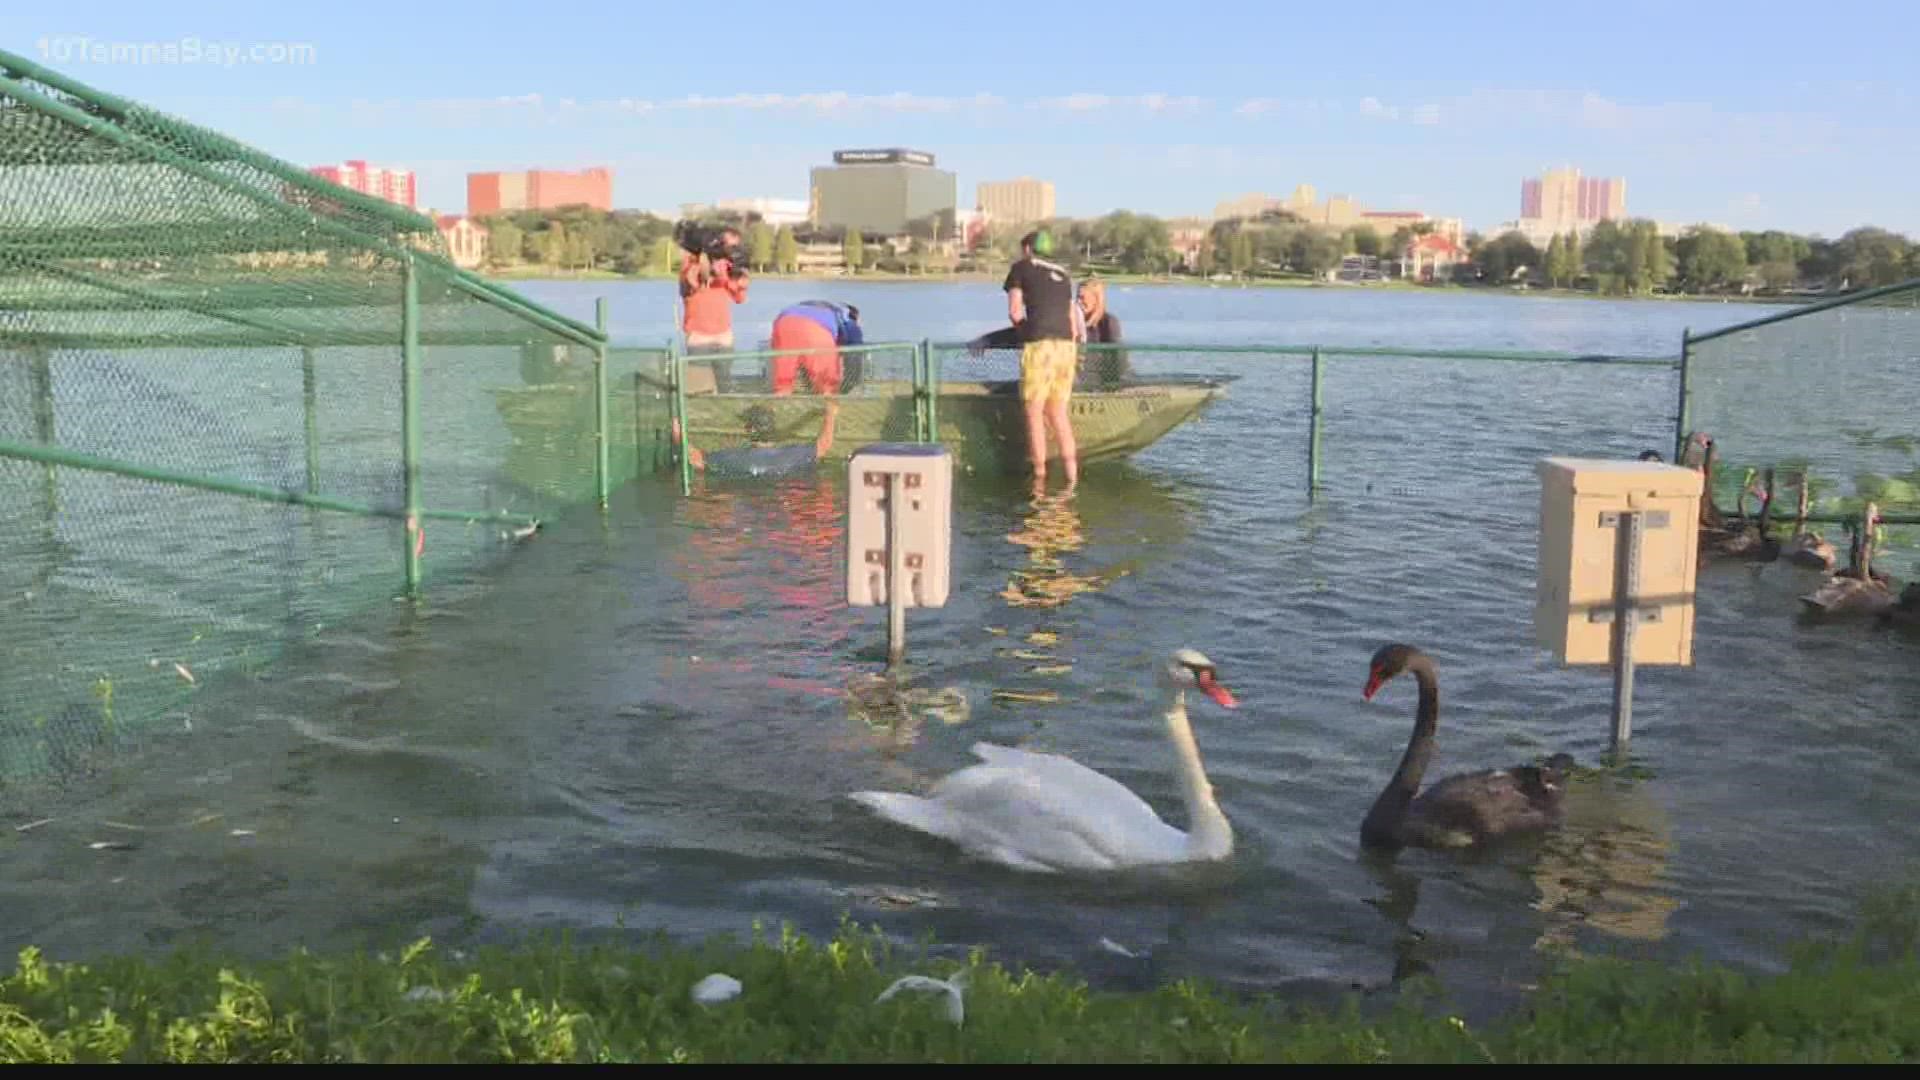 Parks & Recreation employees carefully gather the swans for their annual veterinary check-up.